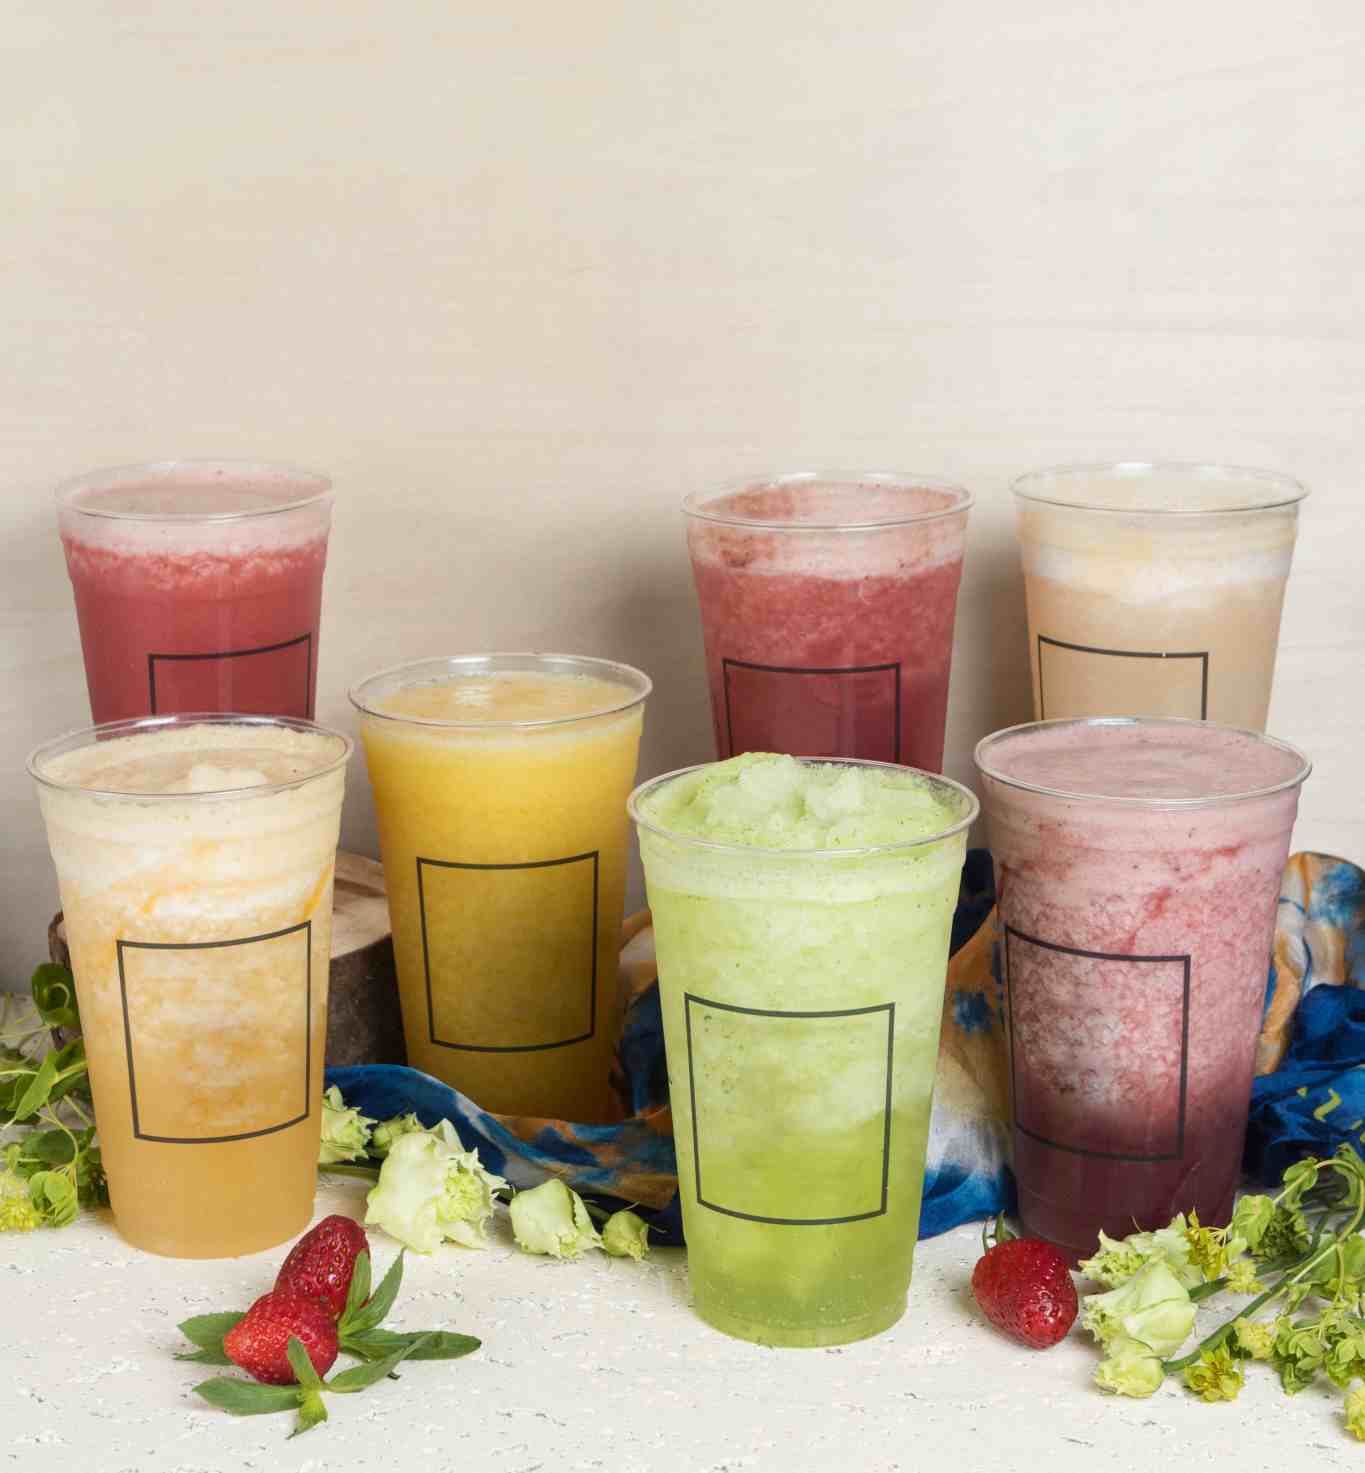 Farmer's market idea: Refreshing juices and smoothies